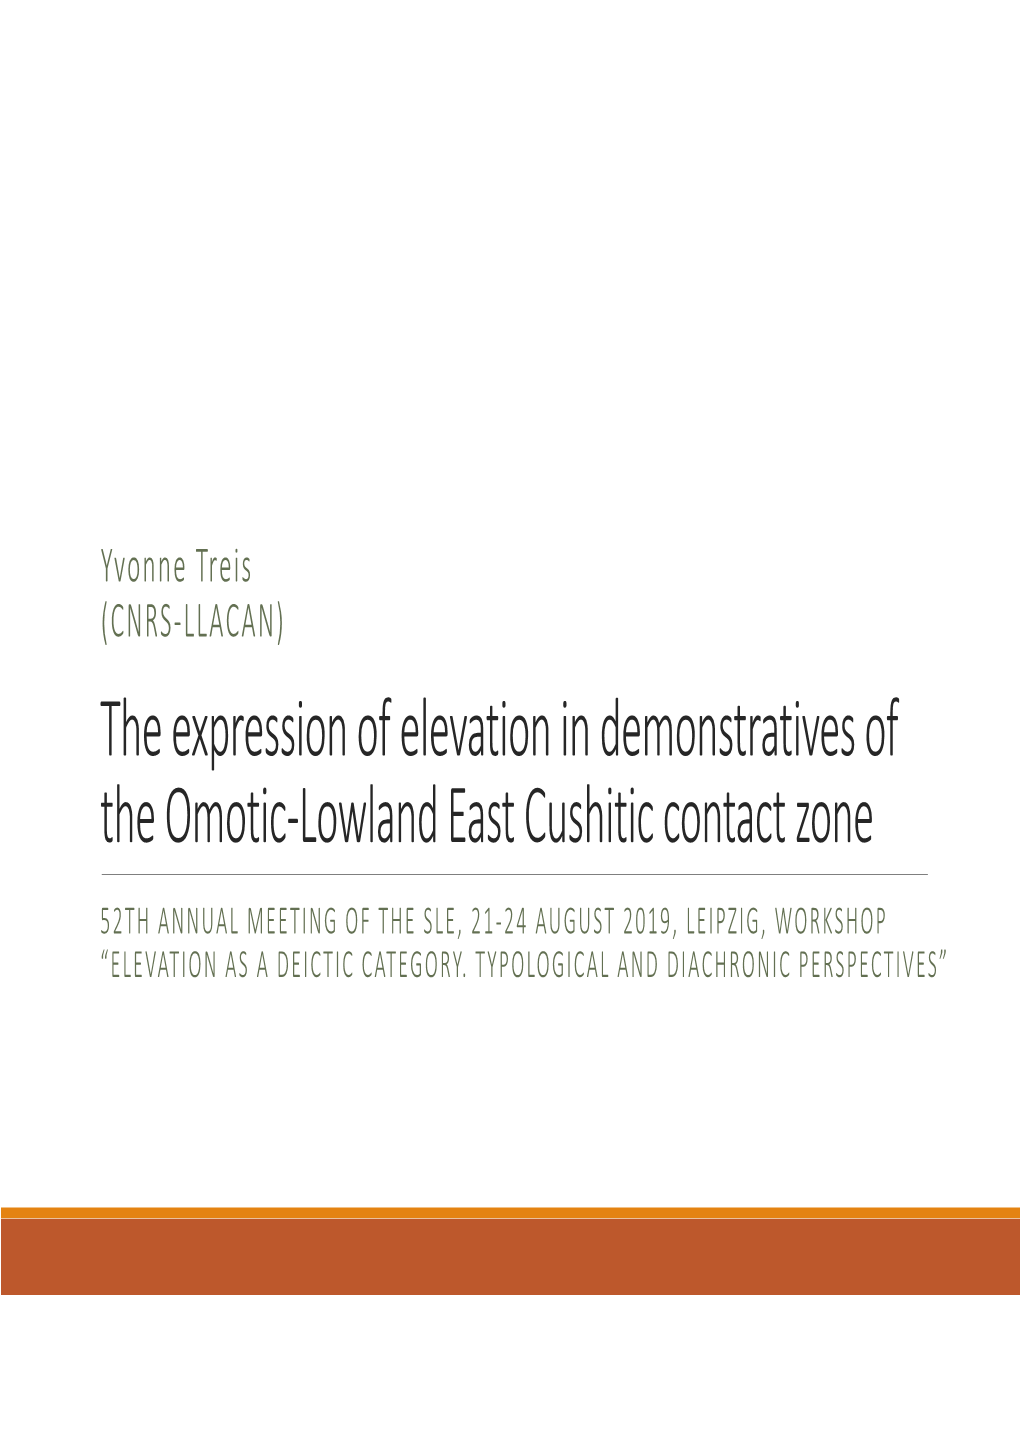 The Expression of Elevation in Demonstratives of the Omotic